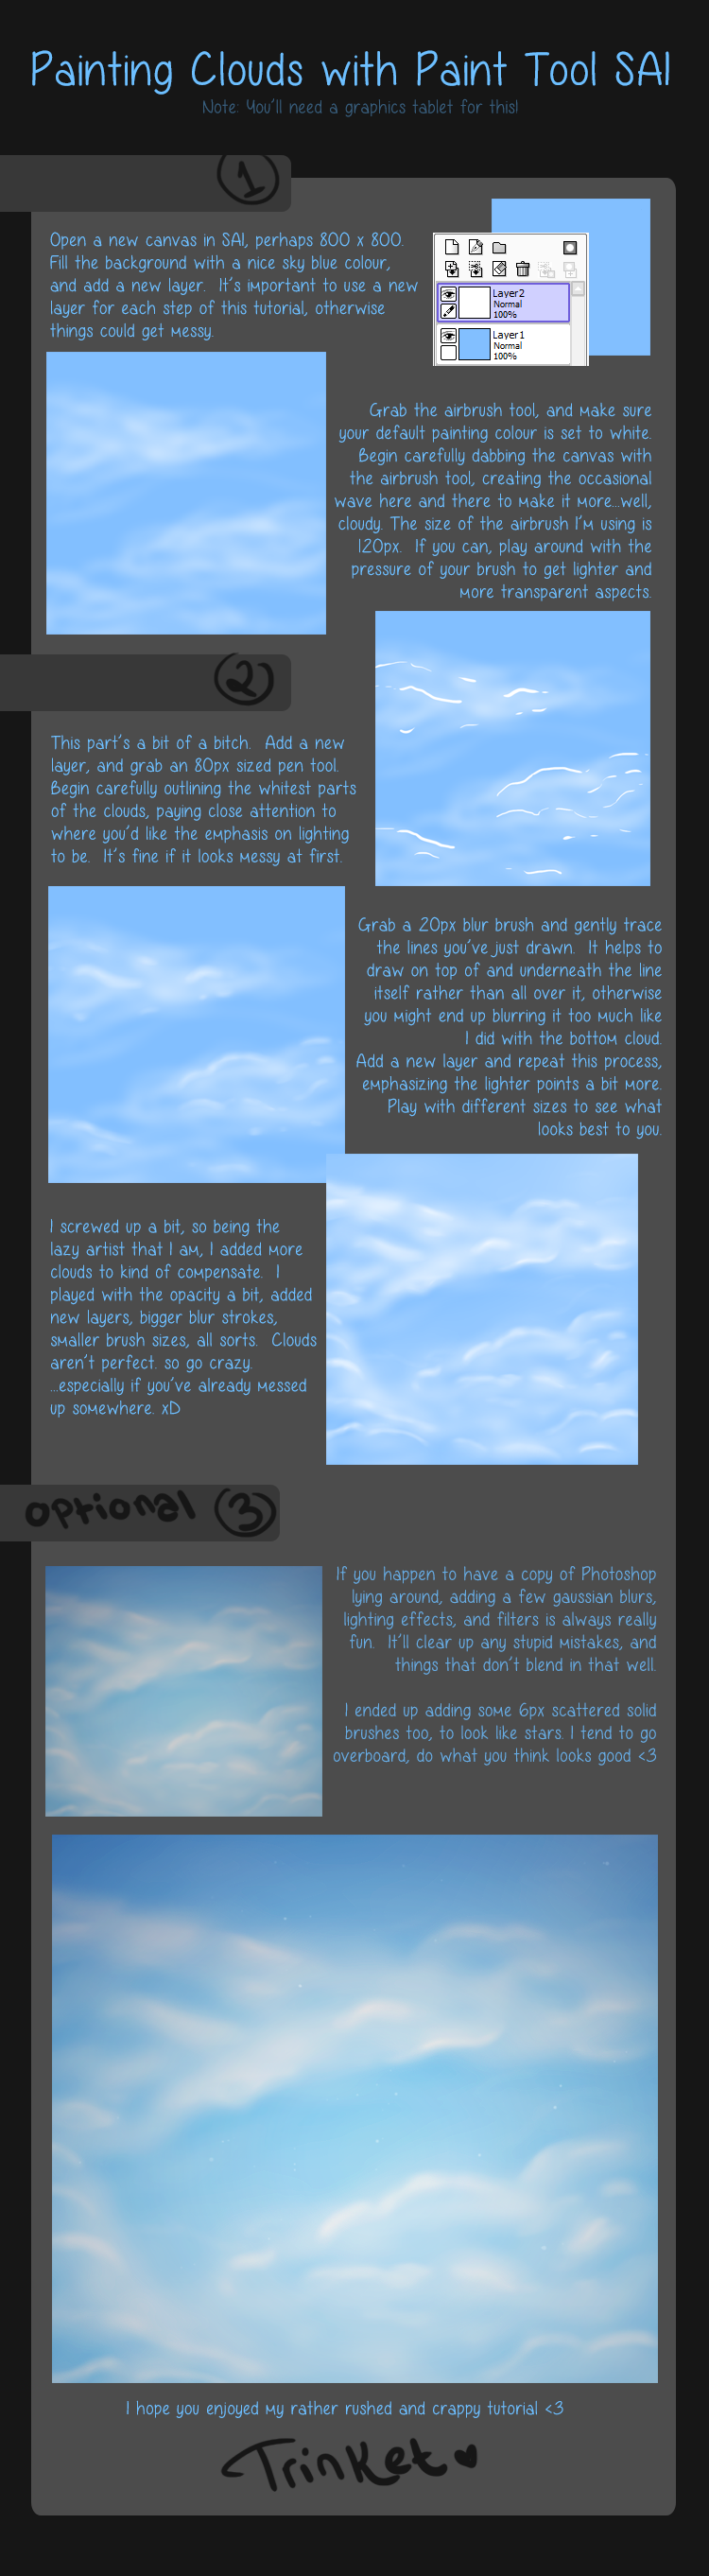 cloud_tutorial_for_sai_by_triinket-d645s